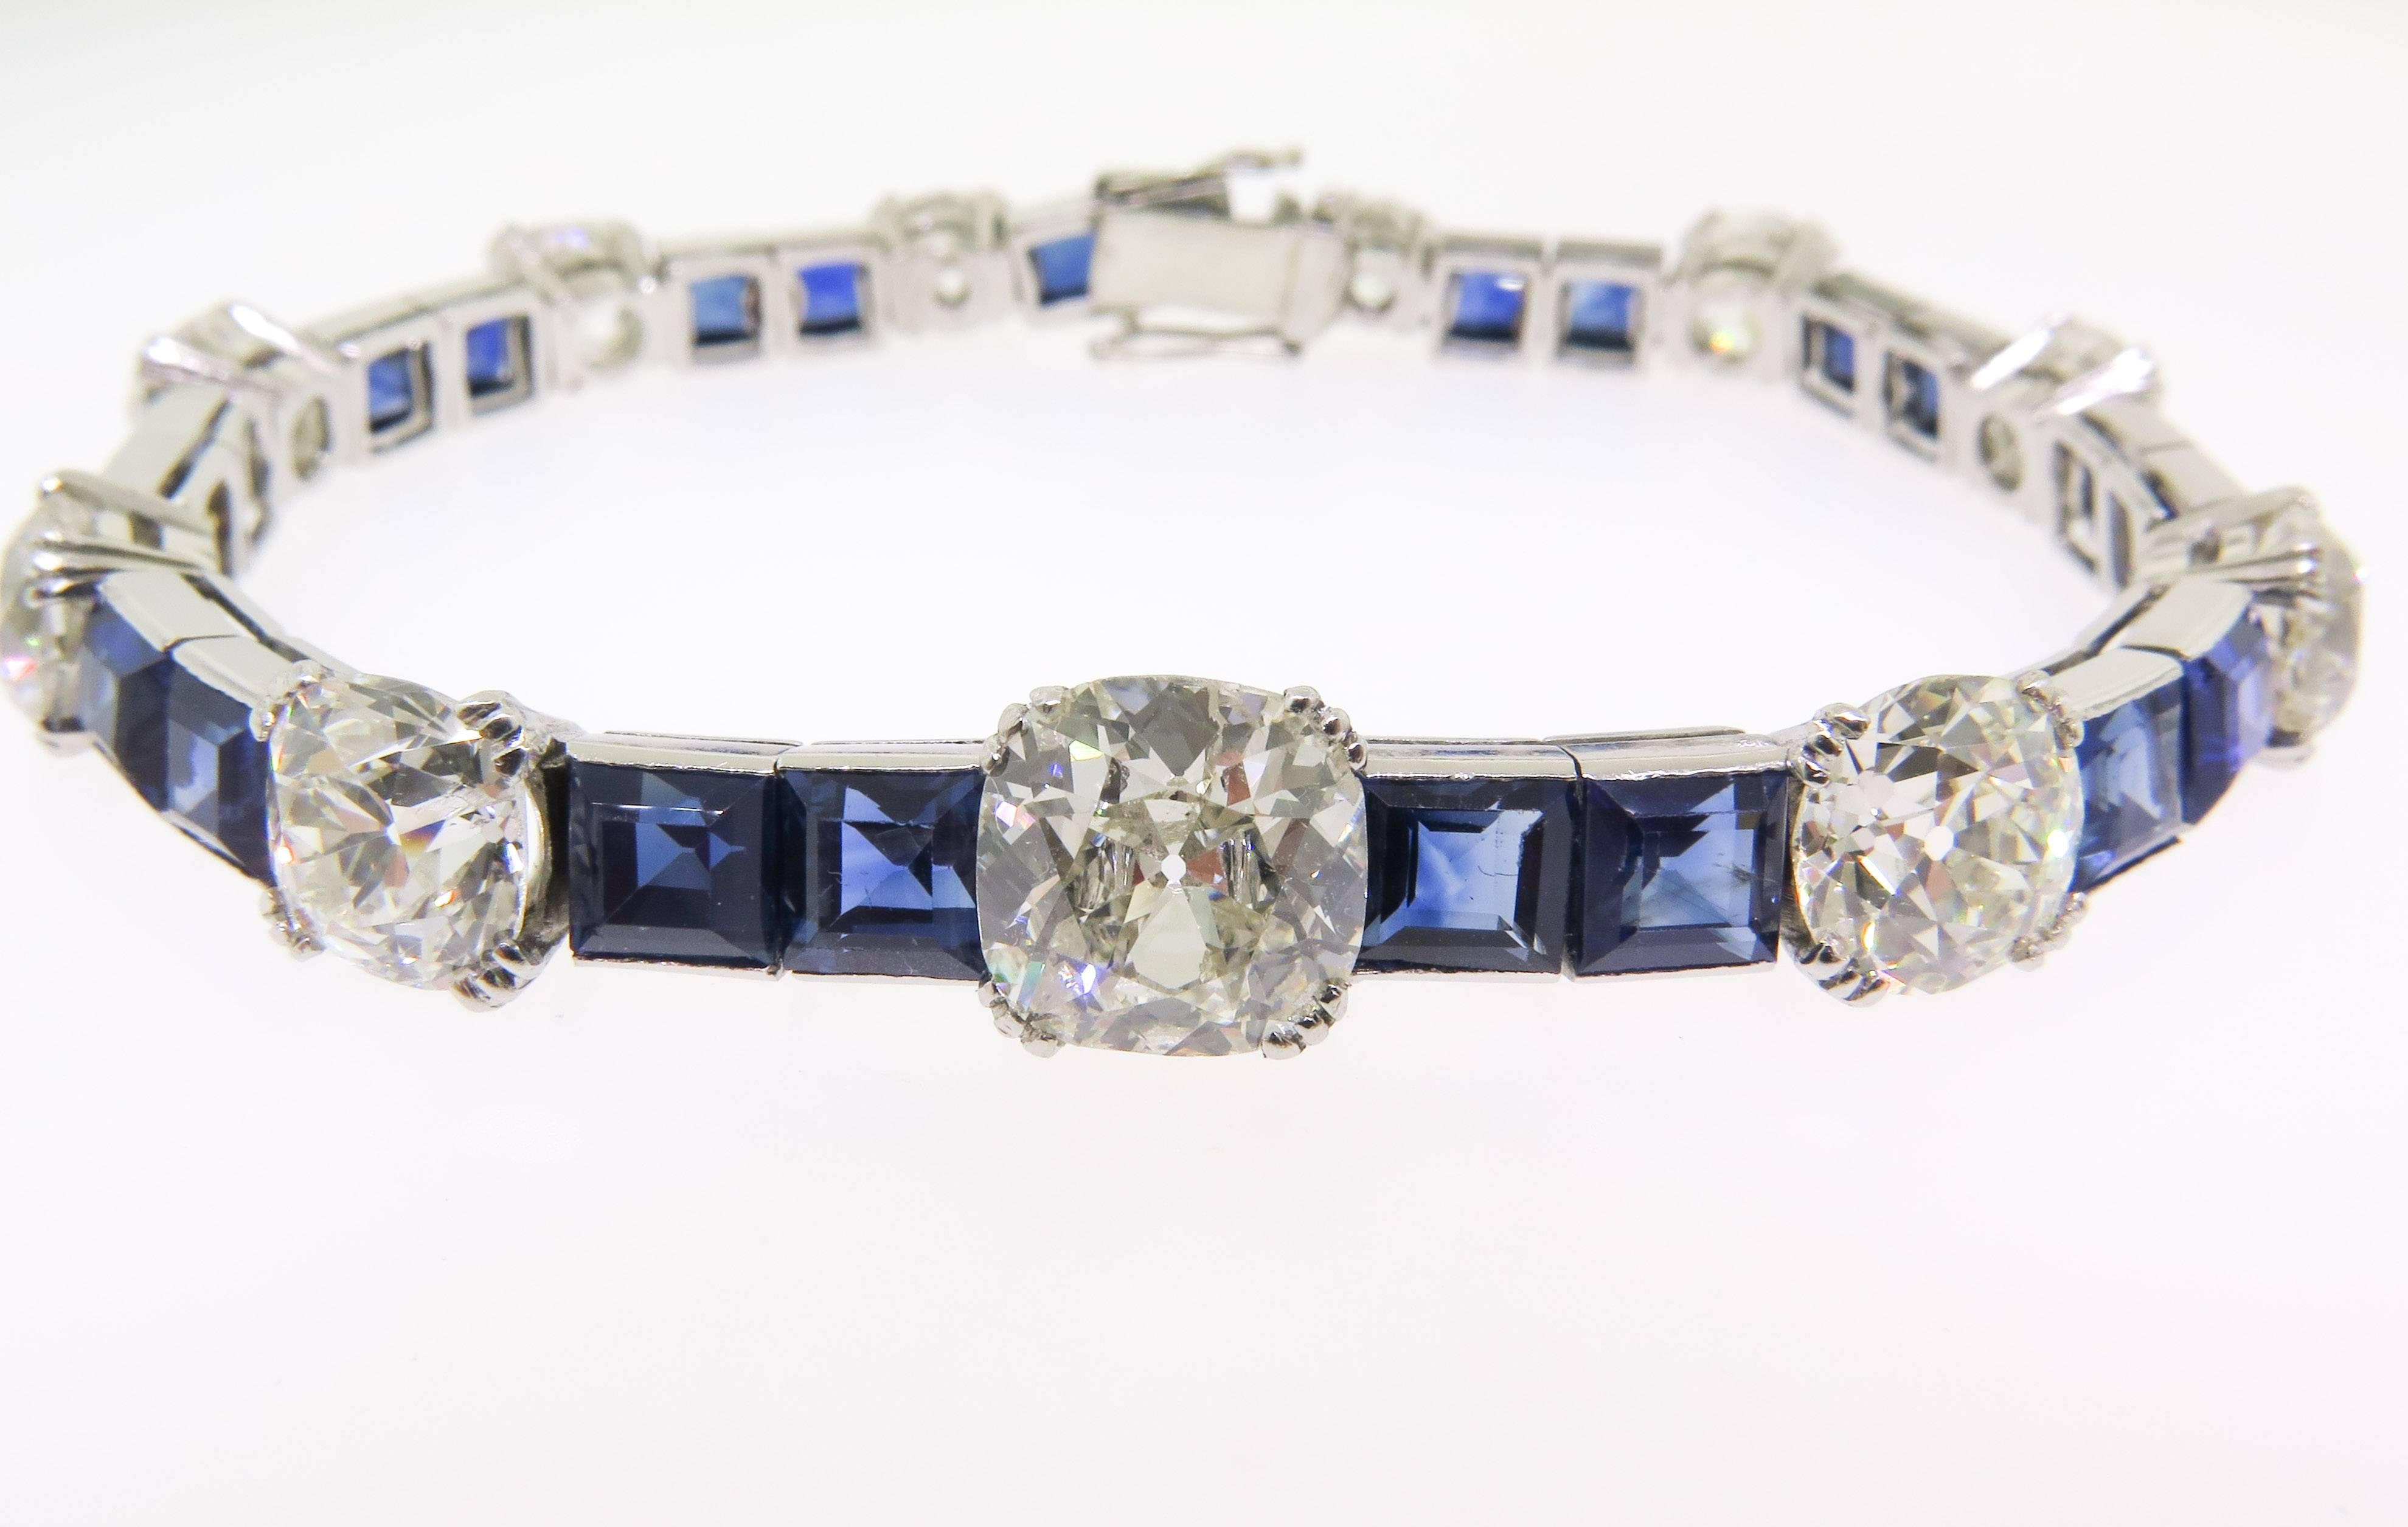 This beautiful bracelet has flare. There are 11 old mine cut cushion shaped diamonds with 22 princess cut sapphires. This is a meticulously crafted bracelet. Sapphires are of great quality and color with a total weight of 12.00 carats and 17.03